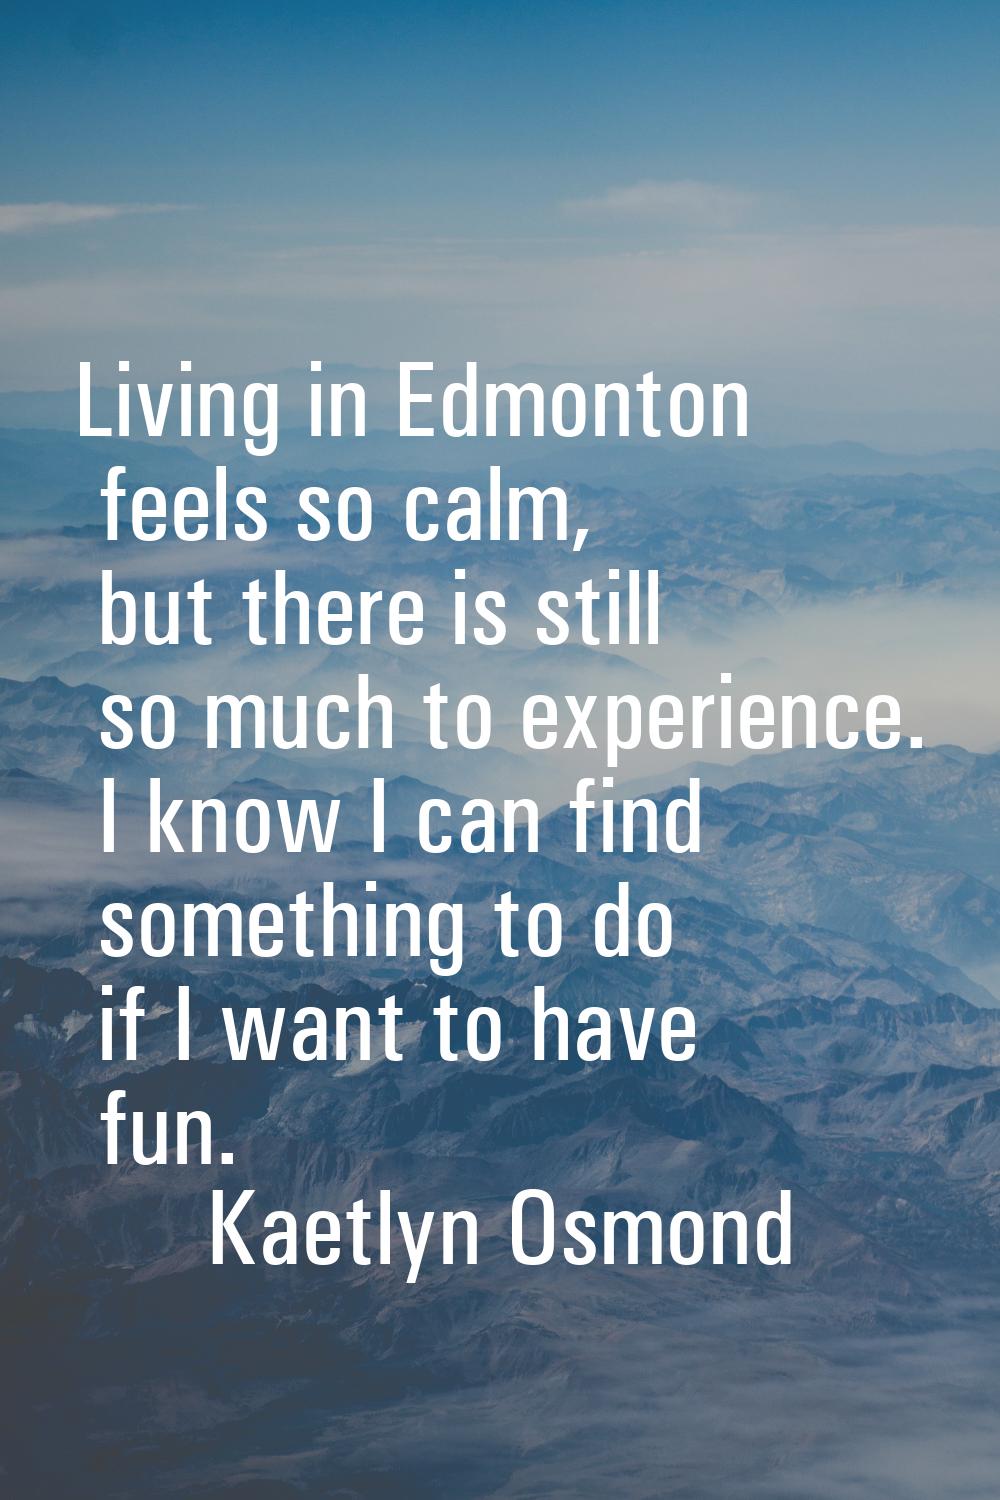 Living in Edmonton feels so calm, but there is still so much to experience. I know I can find somet